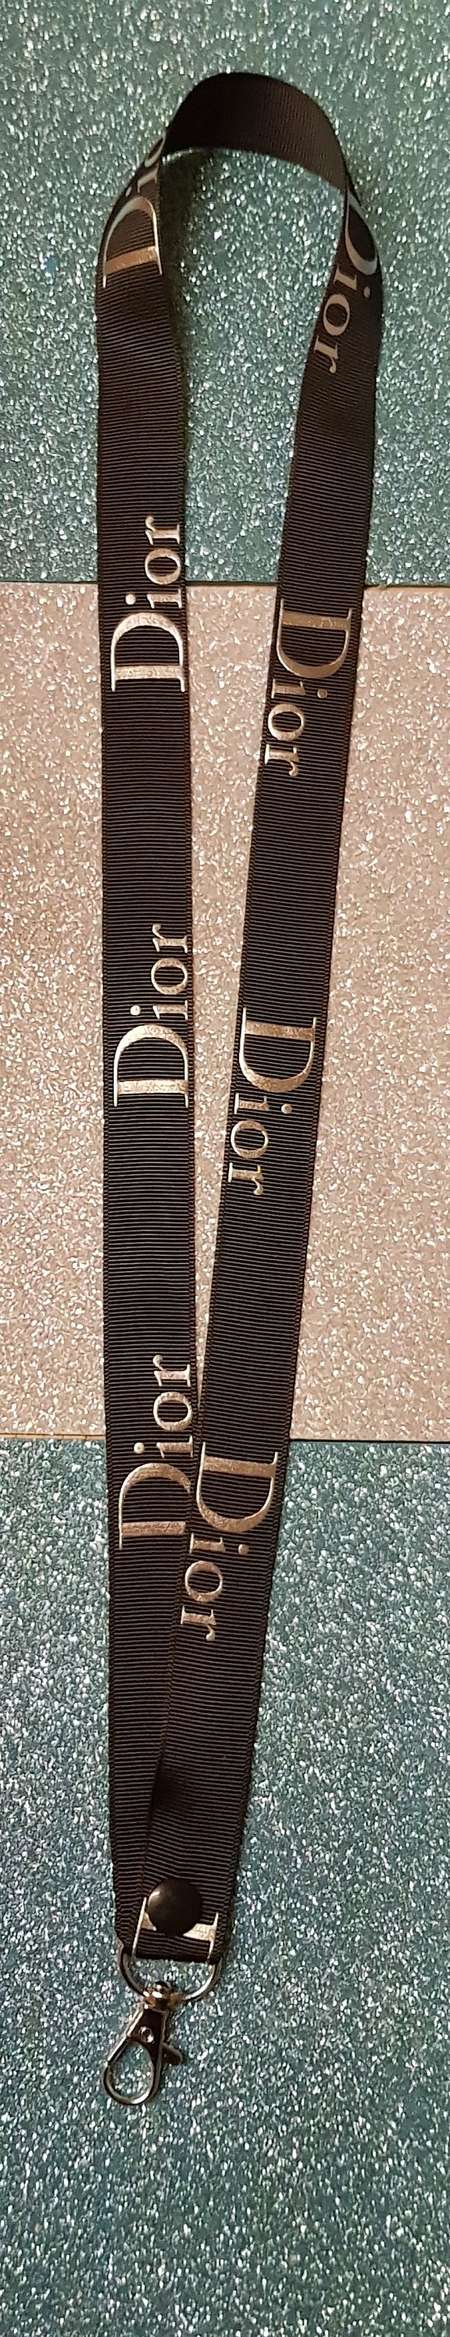 Adults Childs Black and Silver Dior Lanyard Id Badge Holder